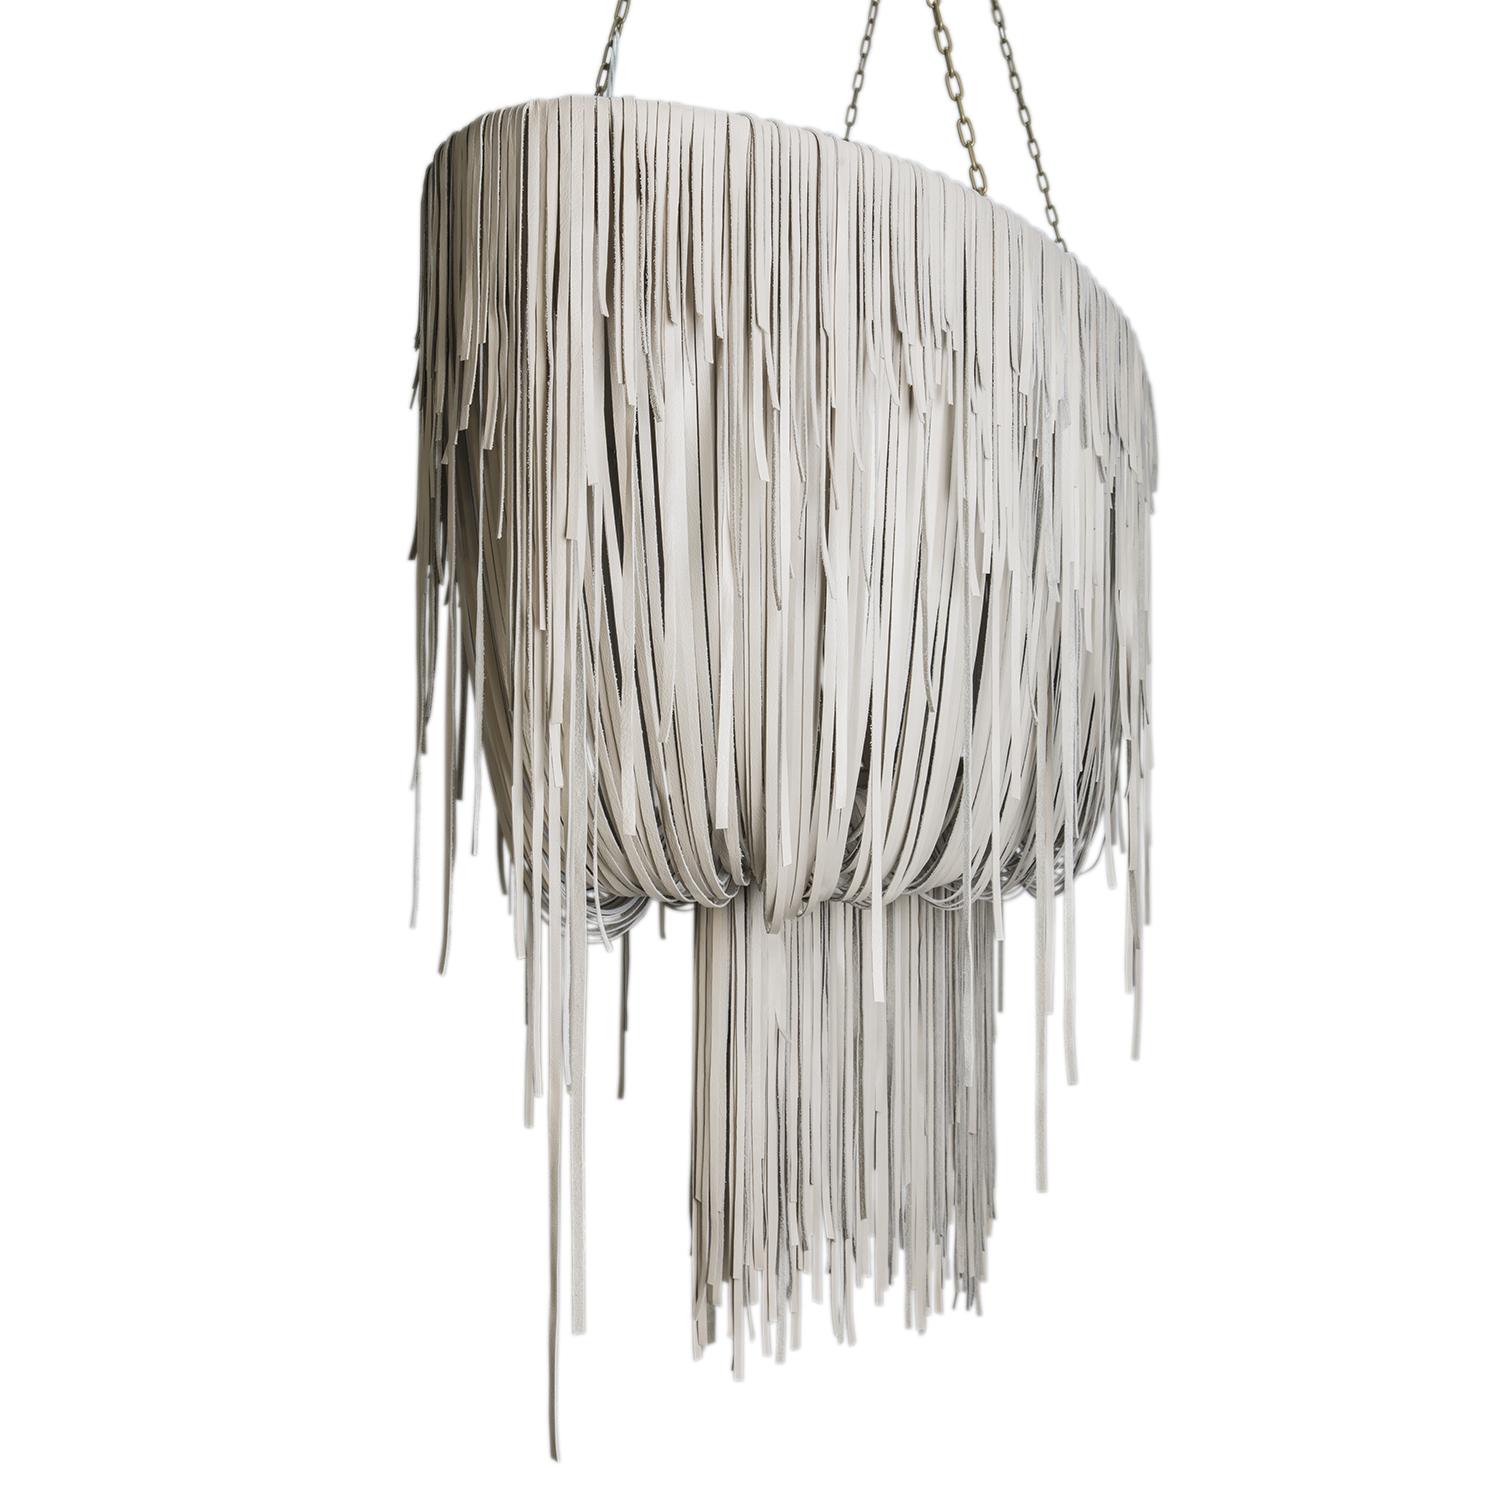 Stretch Oval Urchin Leather Chandelier in Cream-Stone Leather